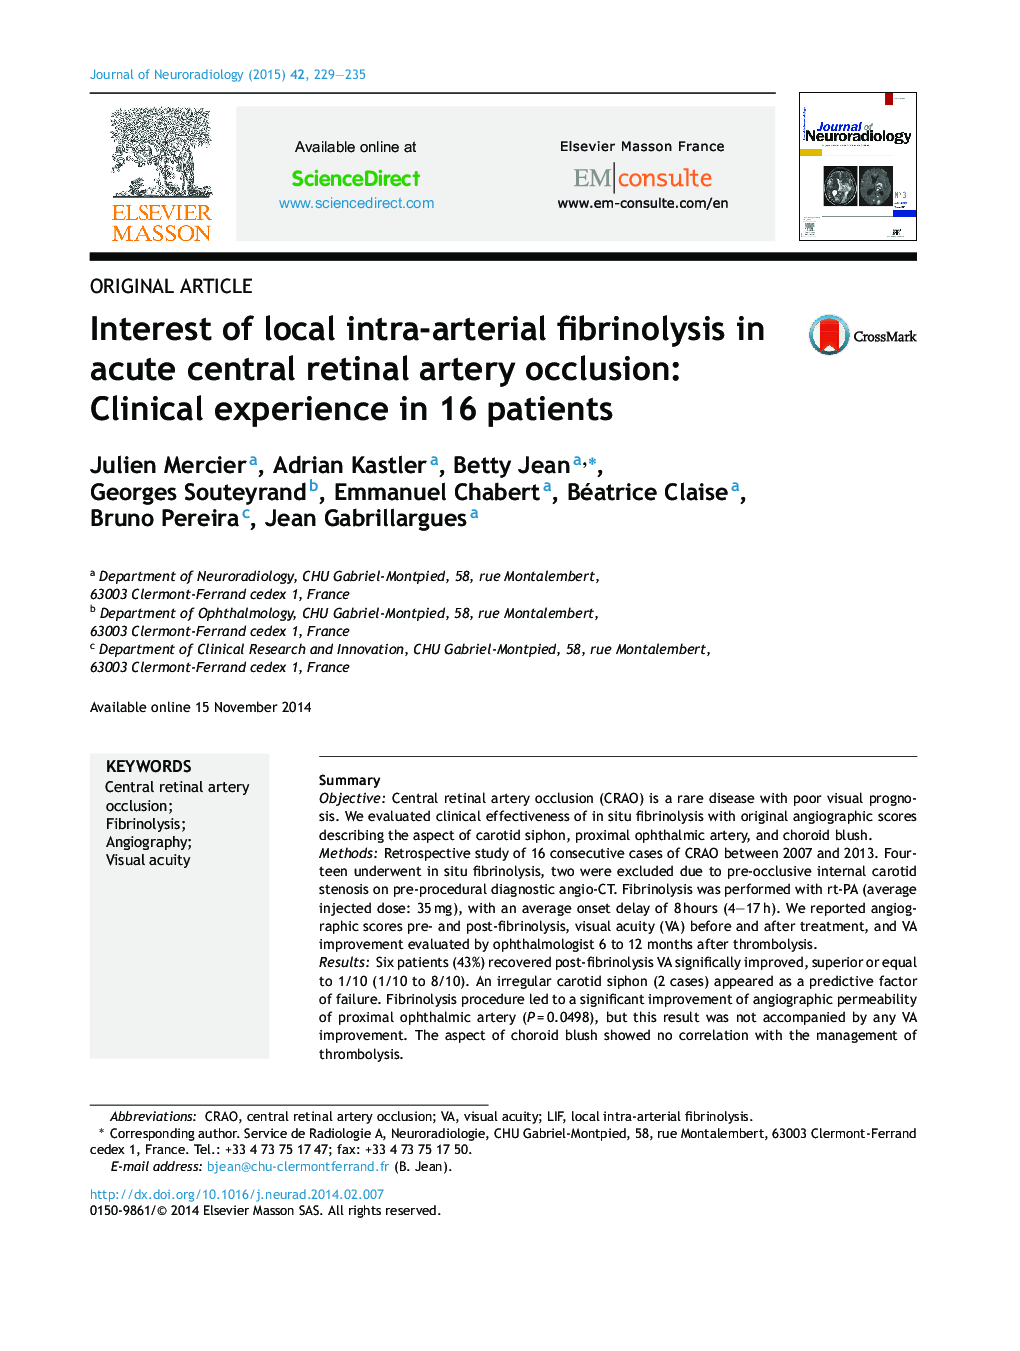 Interest of local intra-arterial fibrinolysis in acute central retinal artery occlusion: Clinical experience in 16 patients